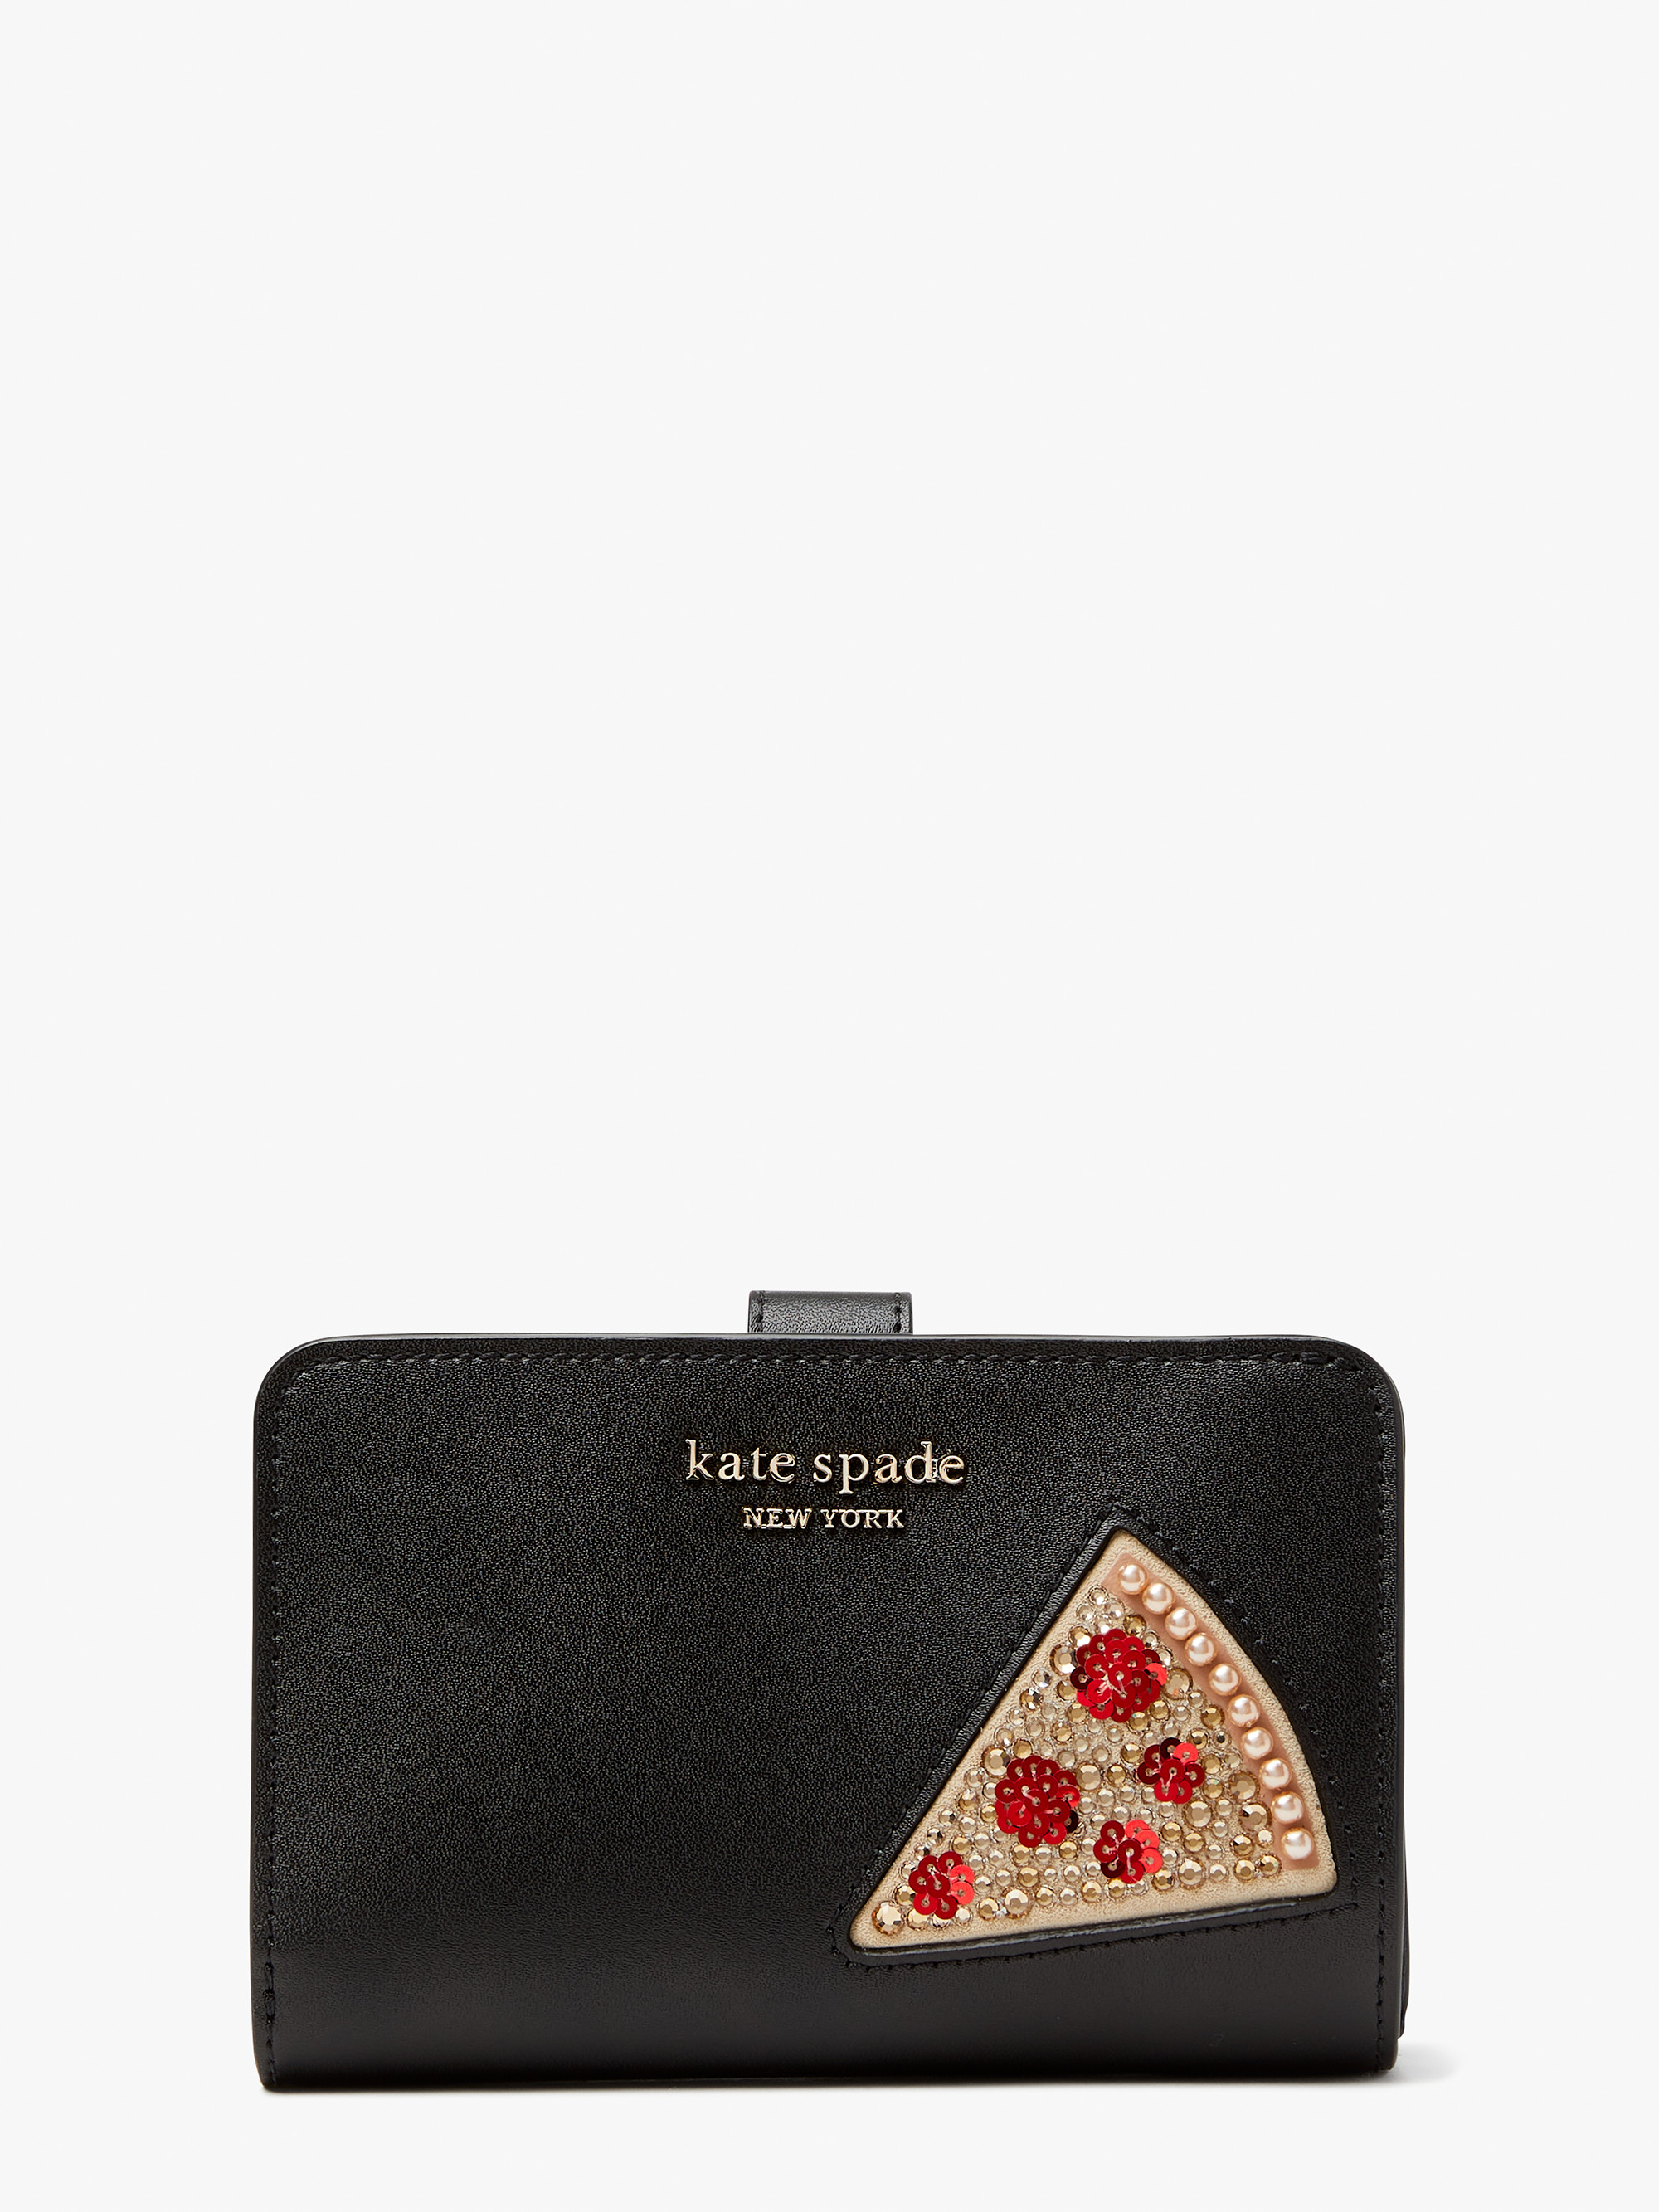 on a roll slice compact wallet